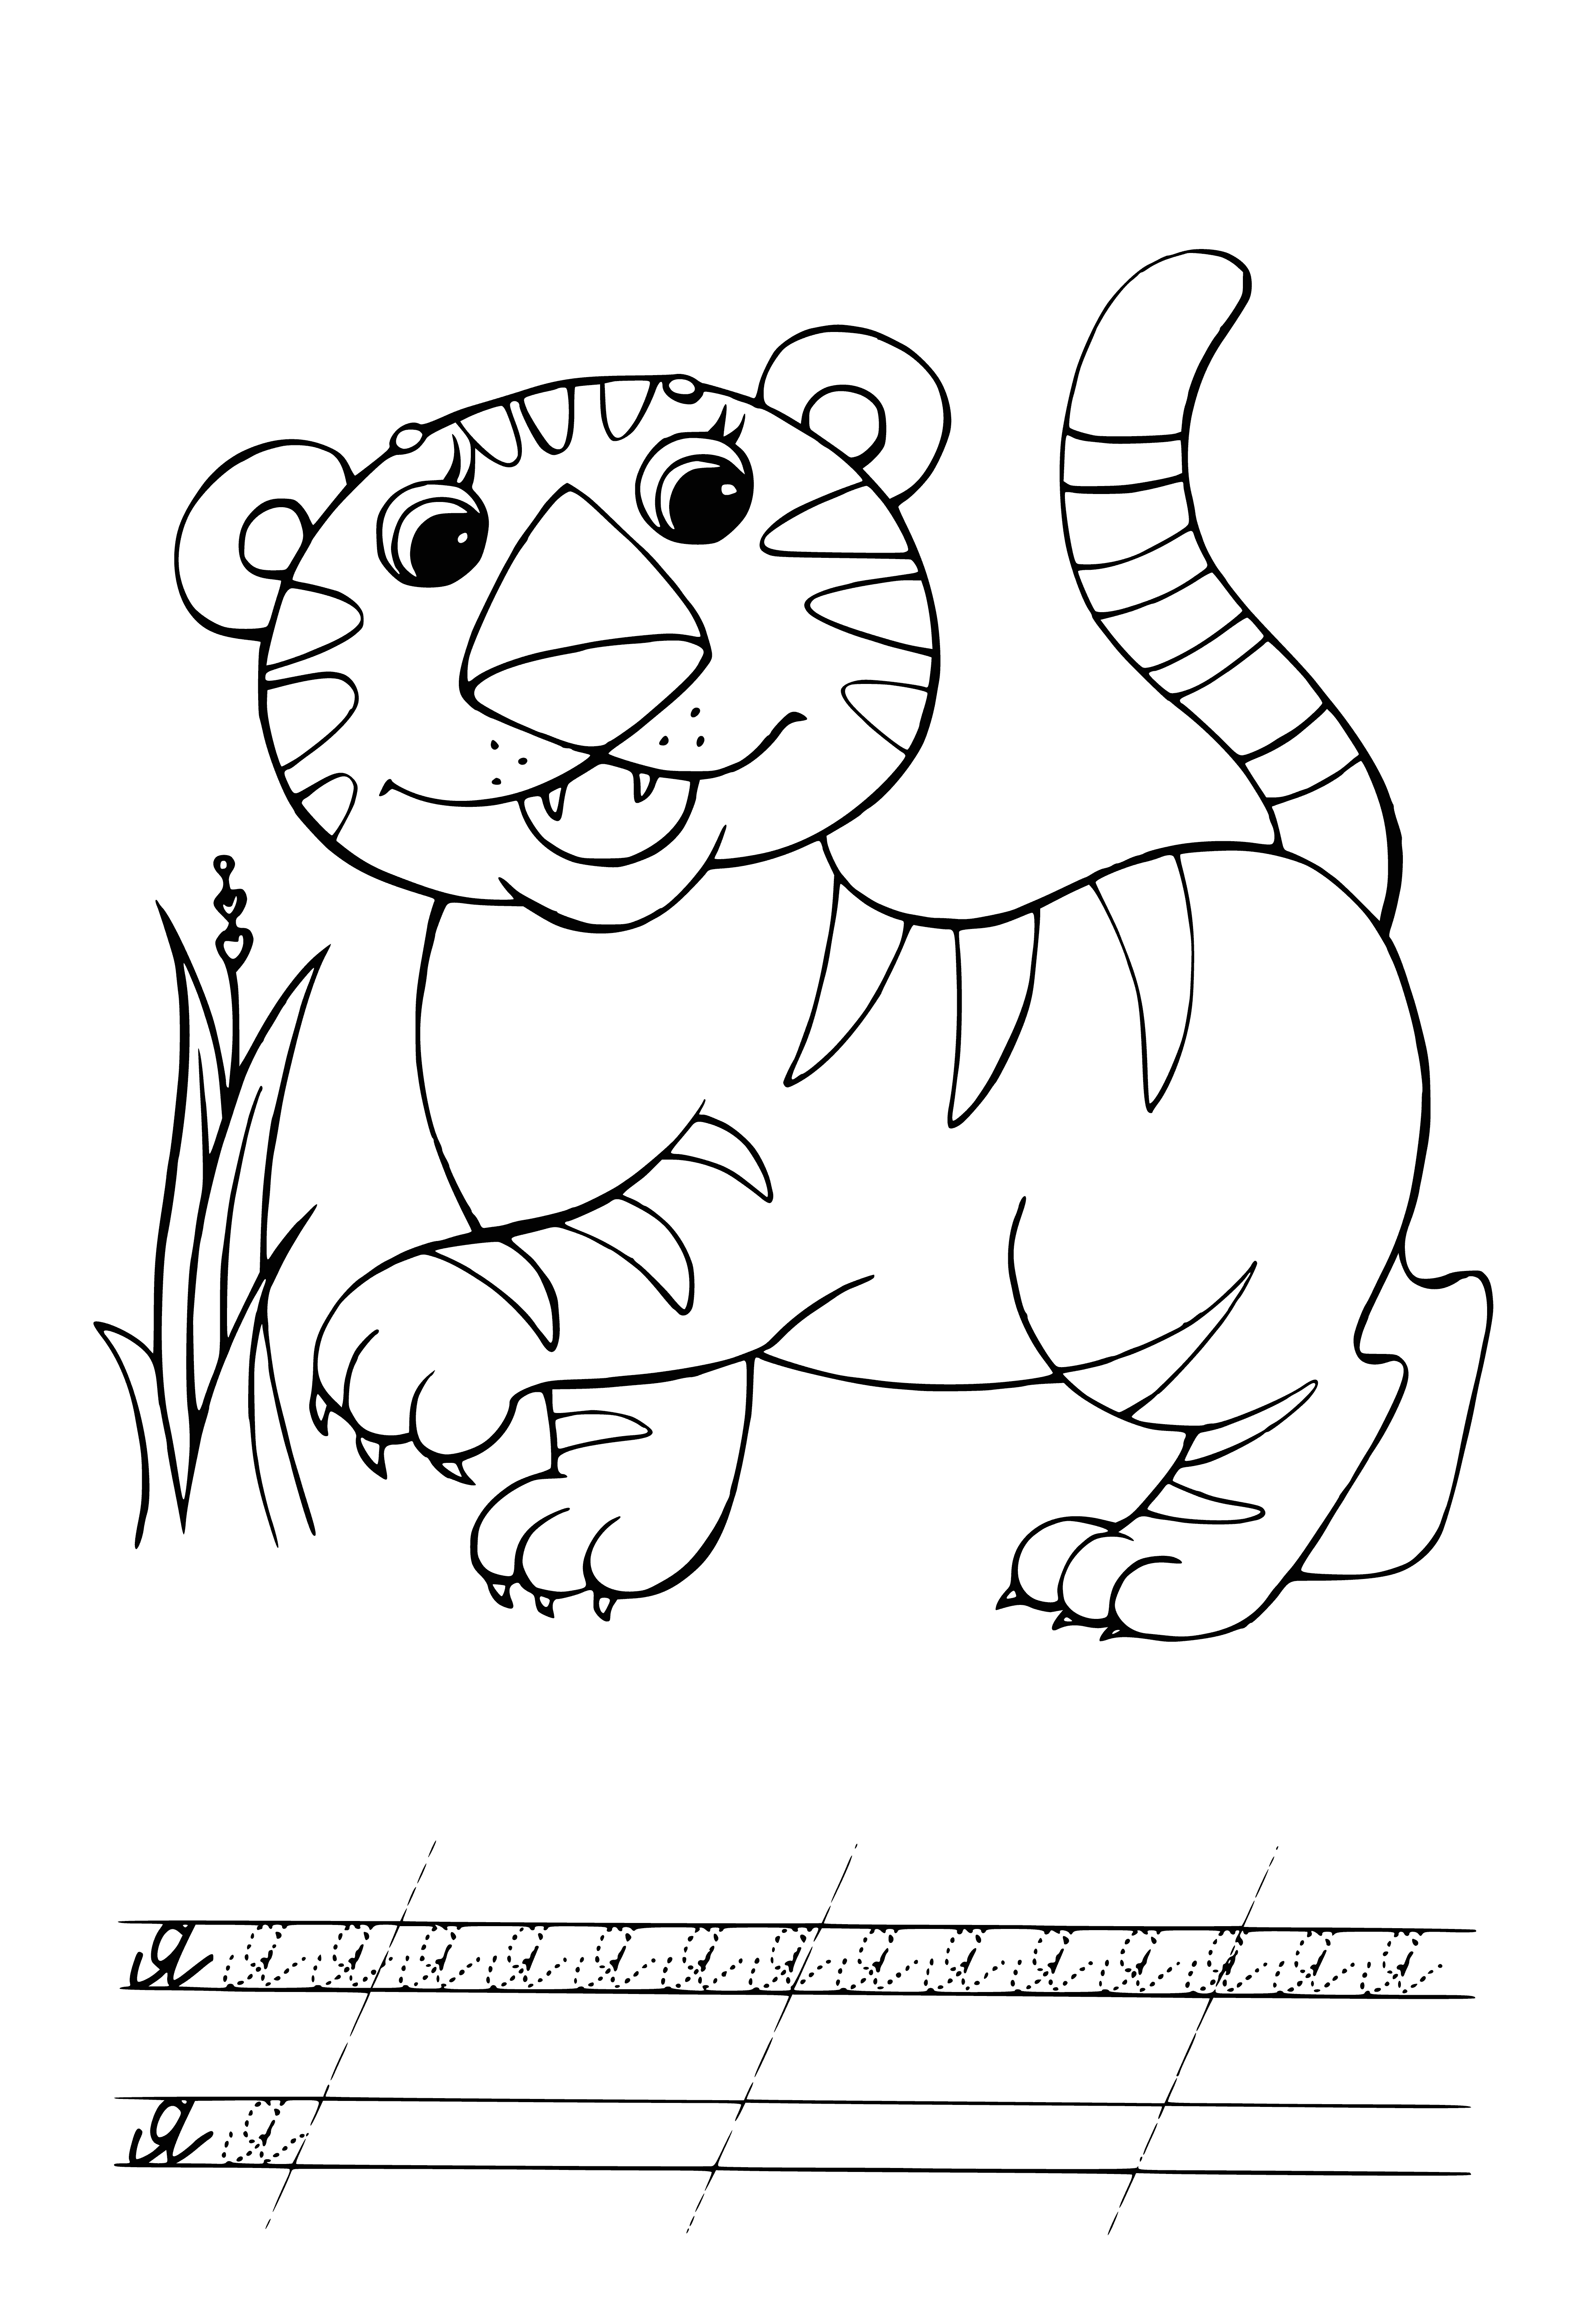 coloring page: A tiger is a large, striped cat found in Asia & Africa with sharp claws & teeth.